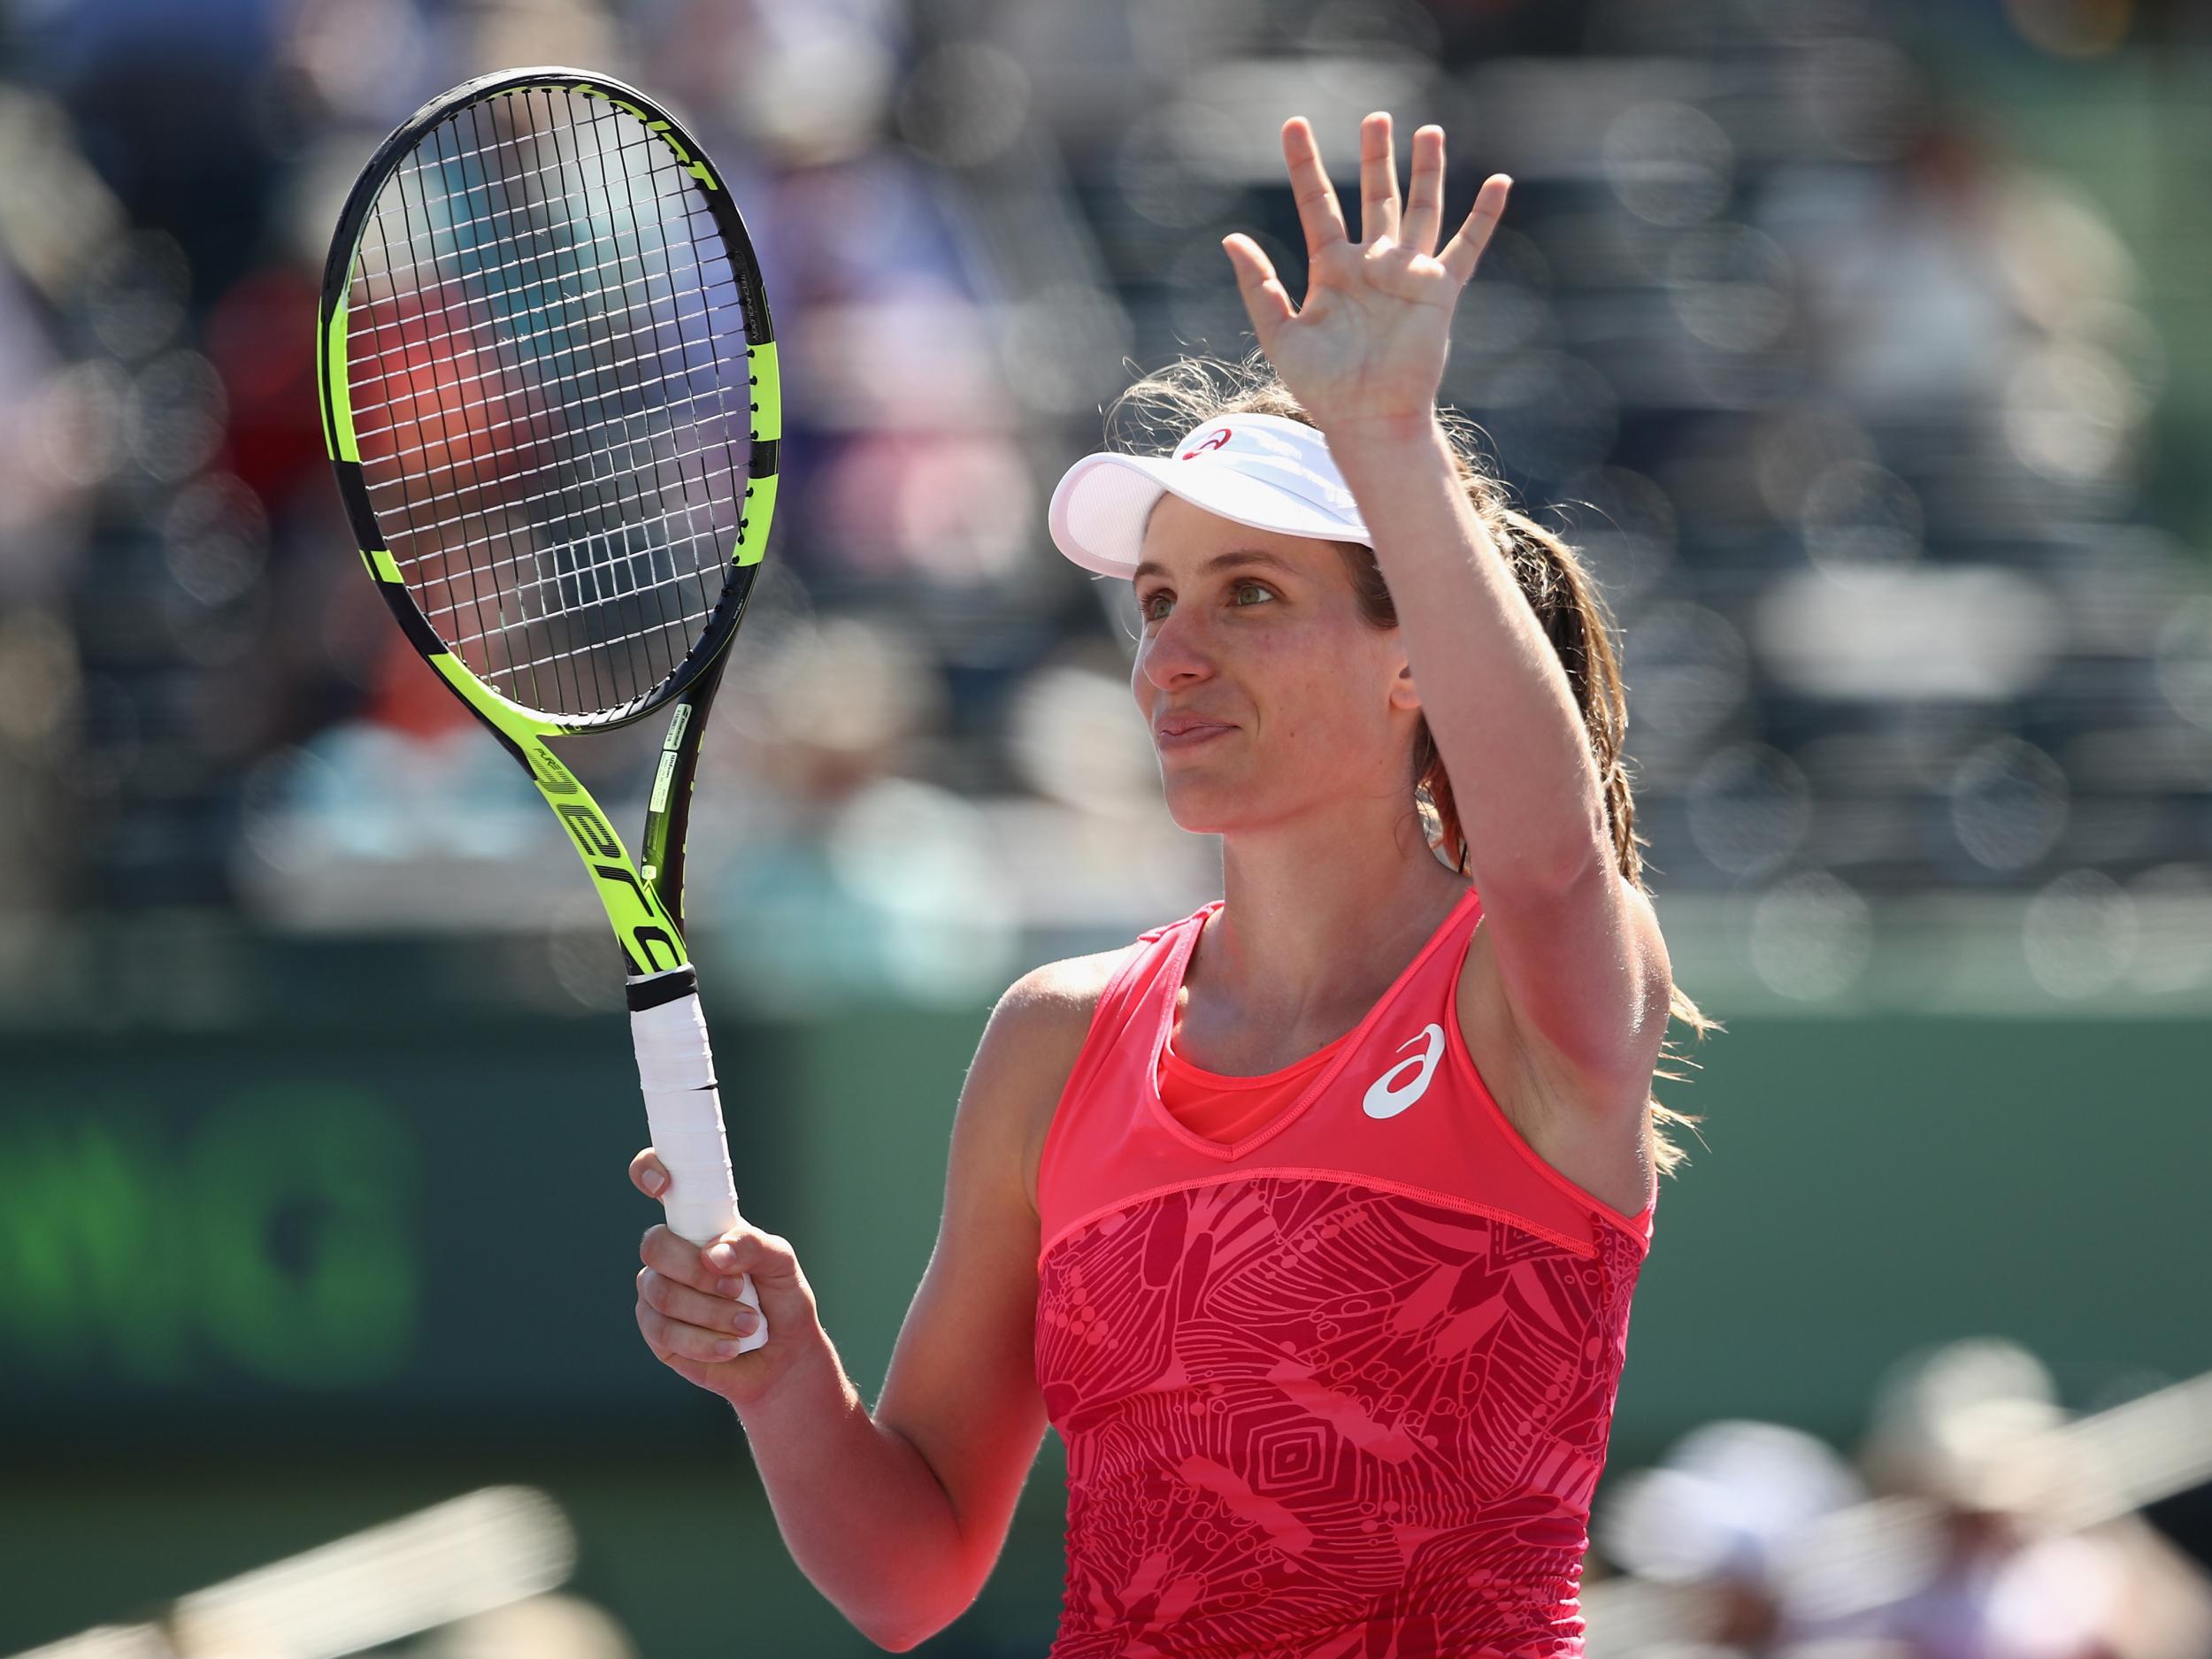 Konta is the first British woman to reach the Miami Open semi-finals